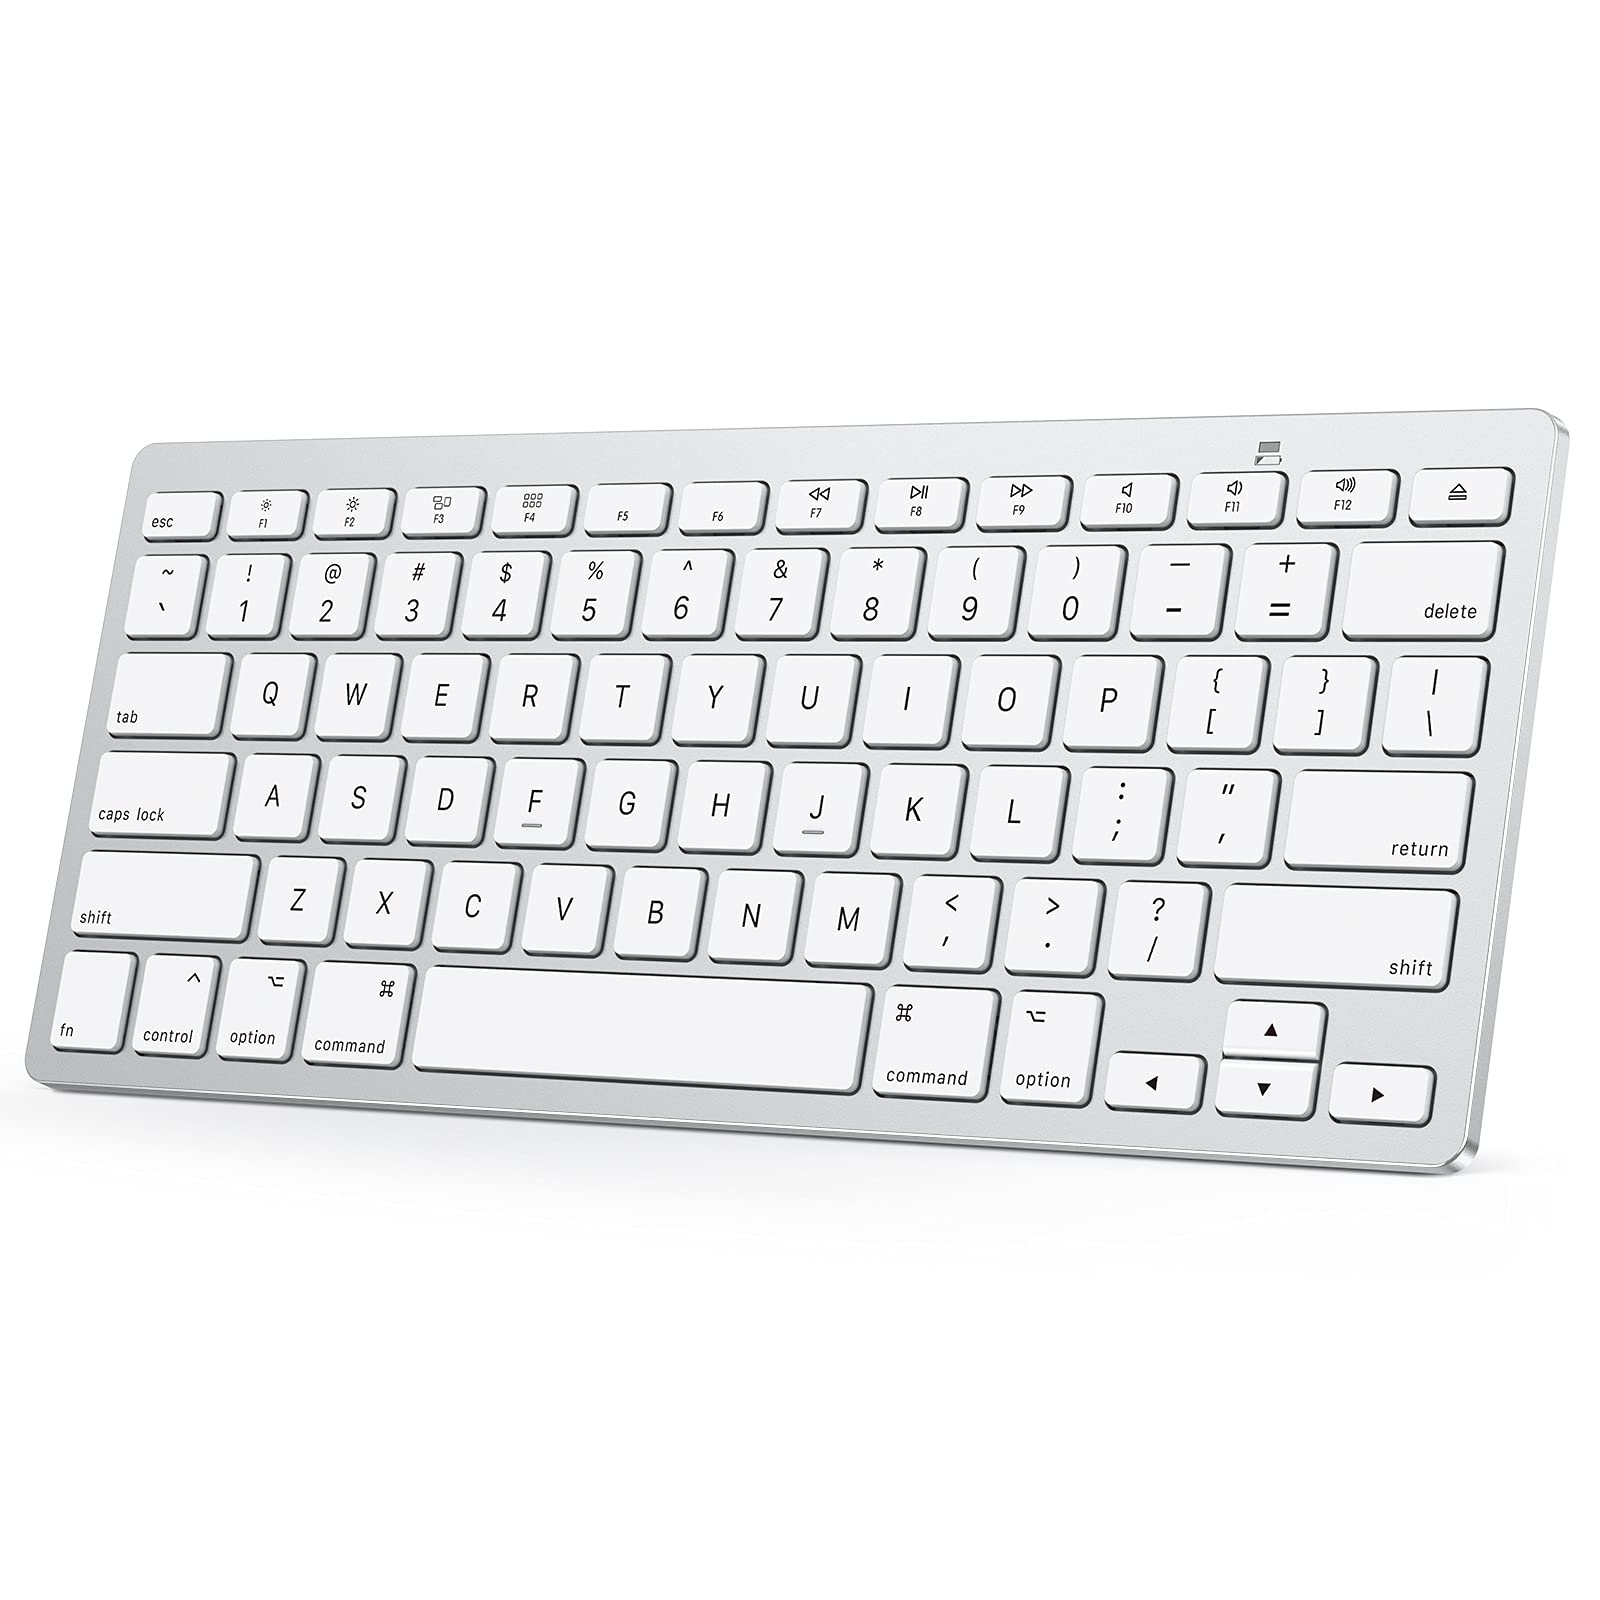 OMOTON Compact Wireless Bluetooth Keyboard for MacBook, iMac, Mac Mini - Compatible with Apple Laptops and Desktops